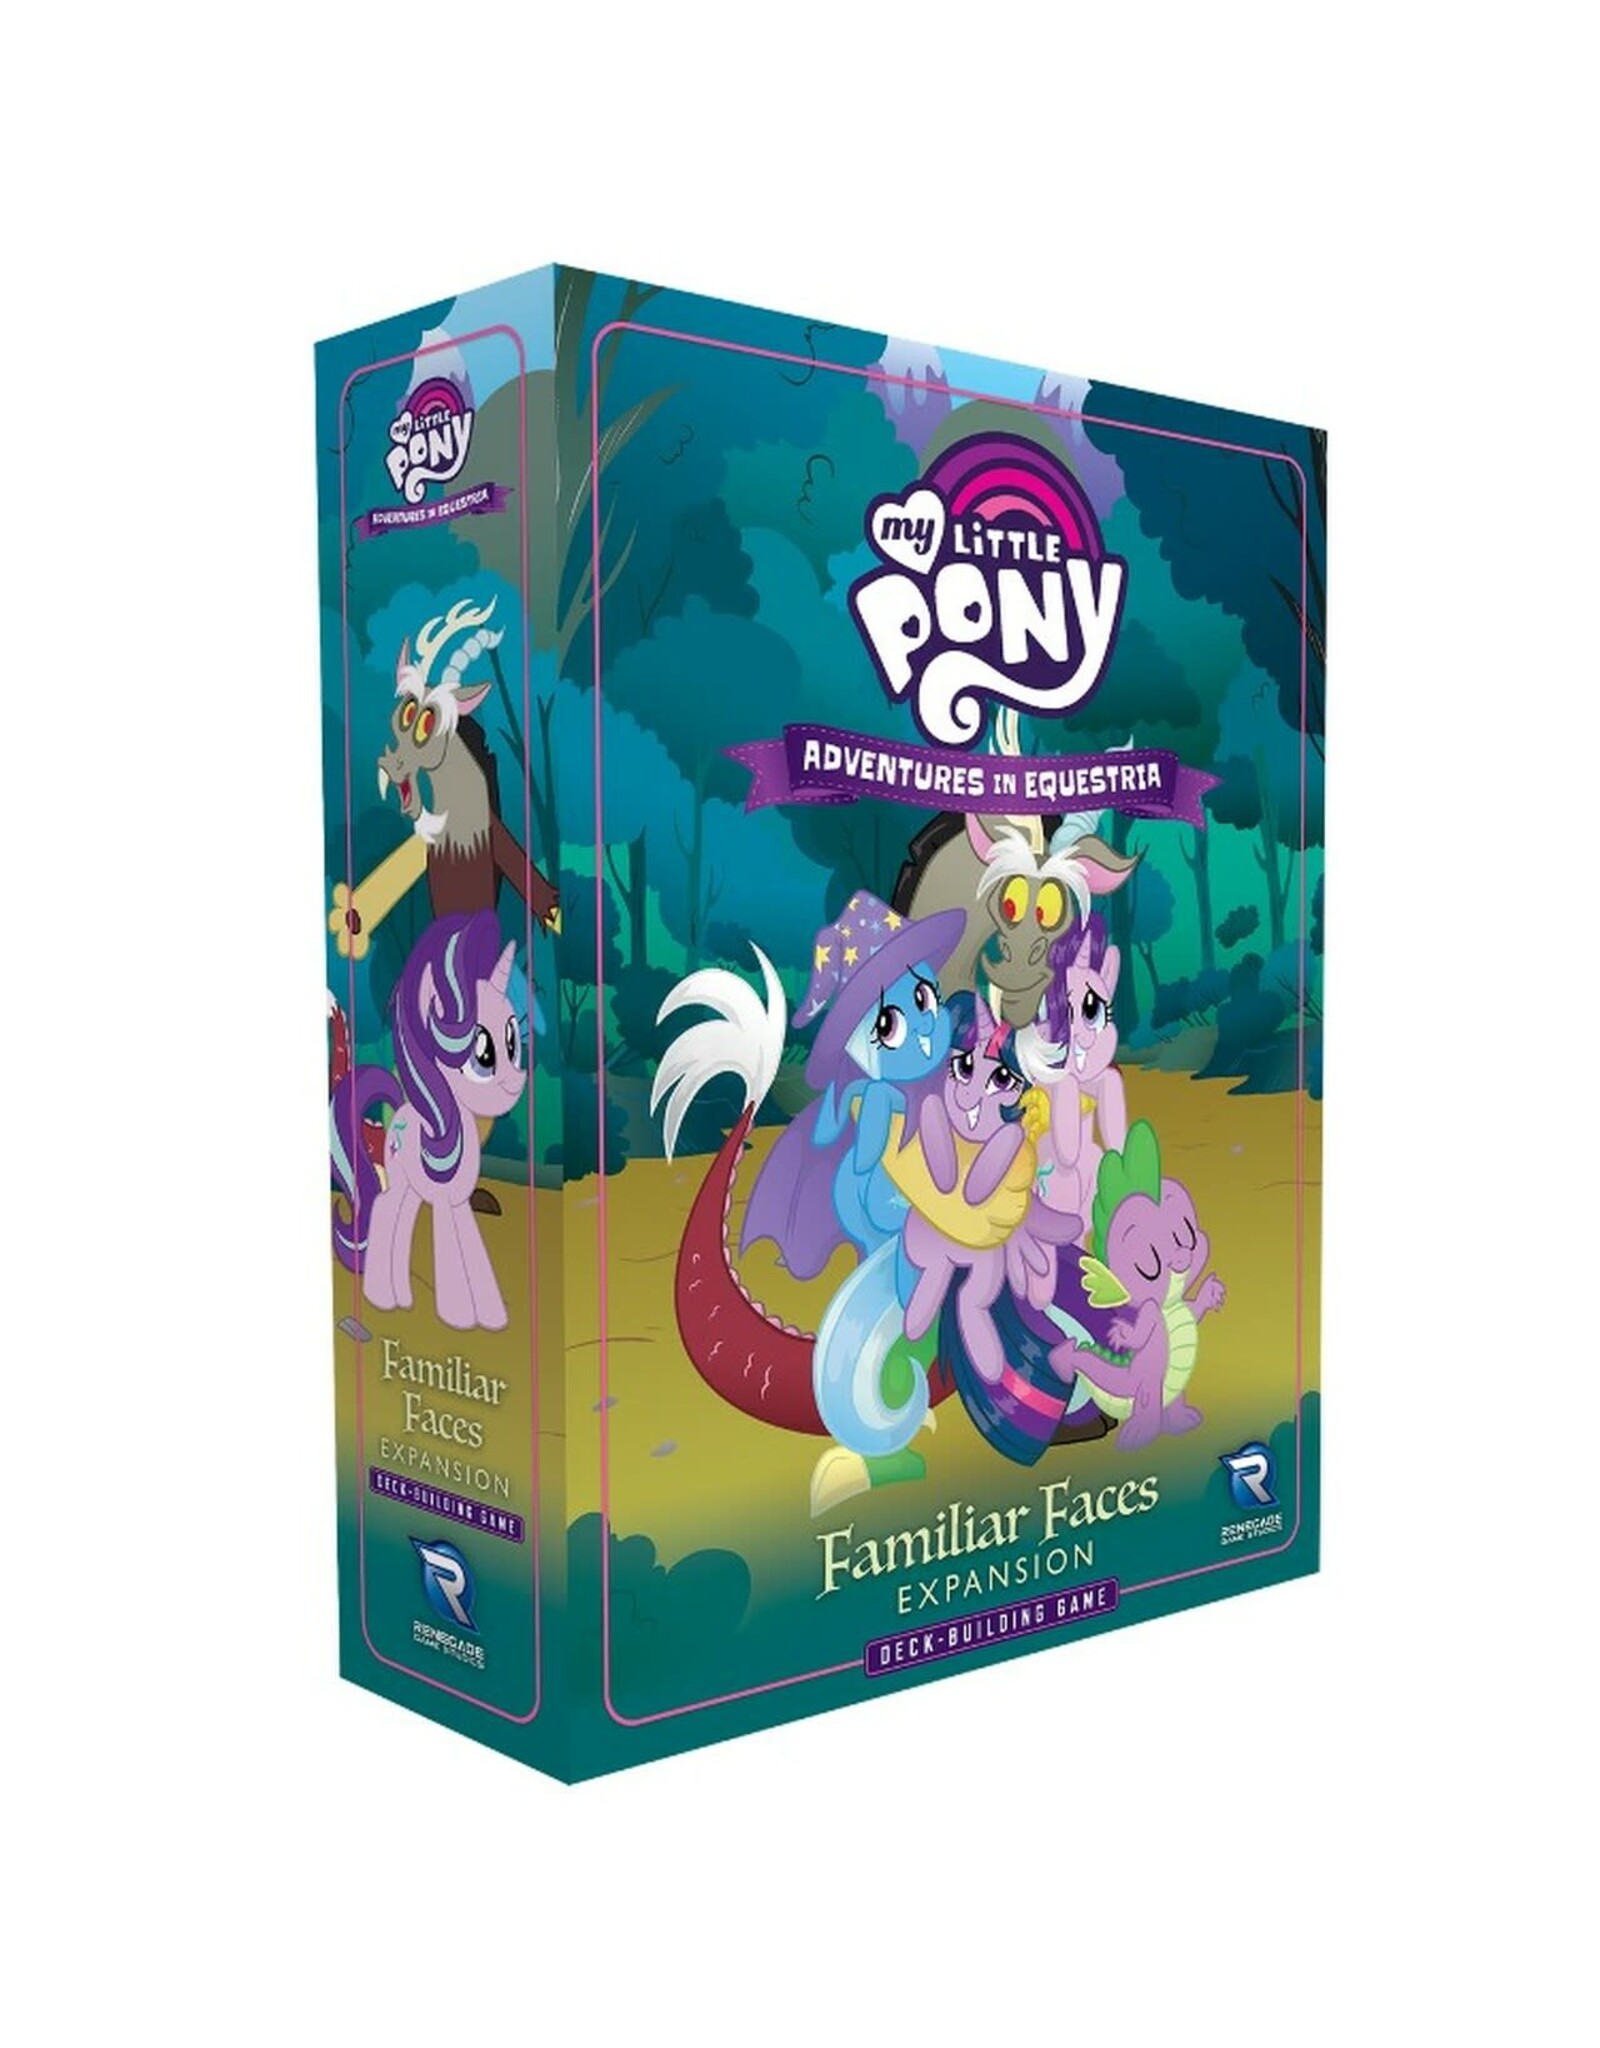 Renegade My Little Pony: Adventures in Equestria DBG - Familiar Faces Expansion